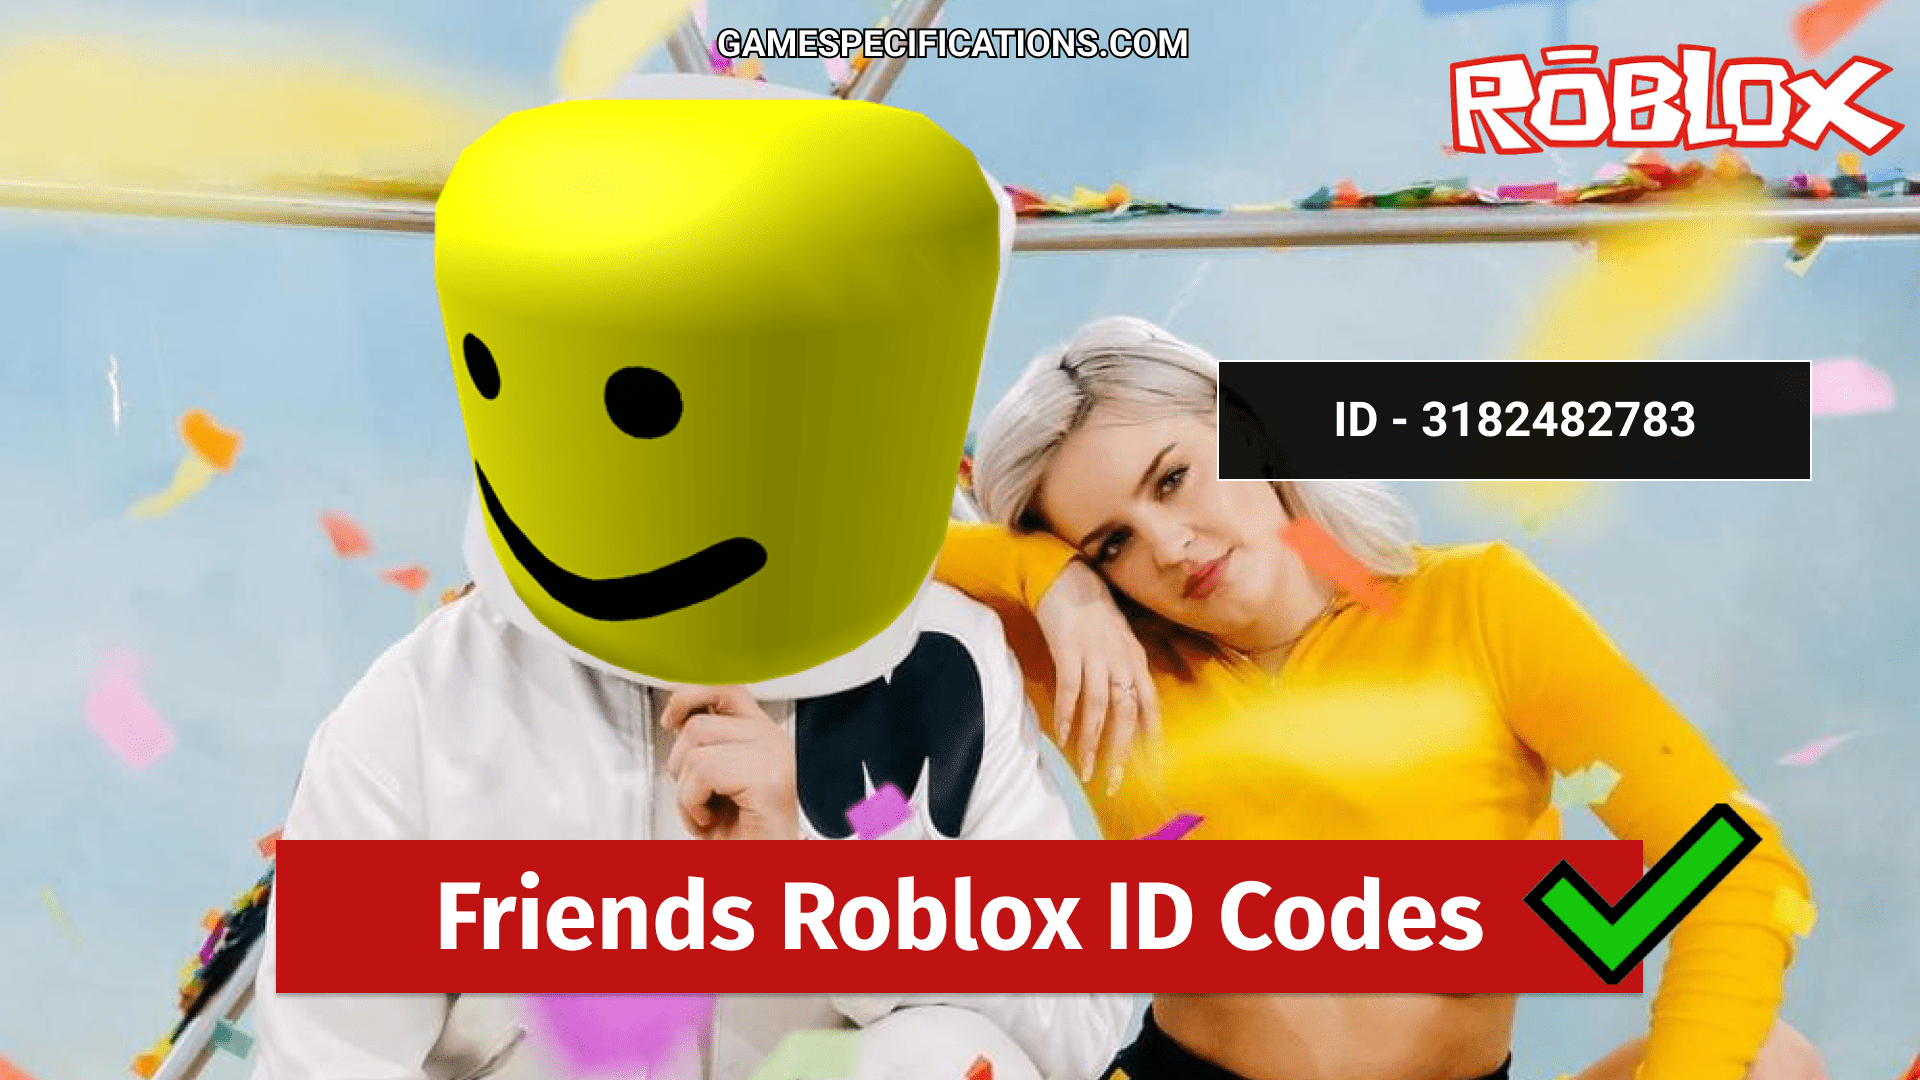 Friends Roblox Id Codes From Marshmello 2021 Game Specifications - roblox id codes for country music